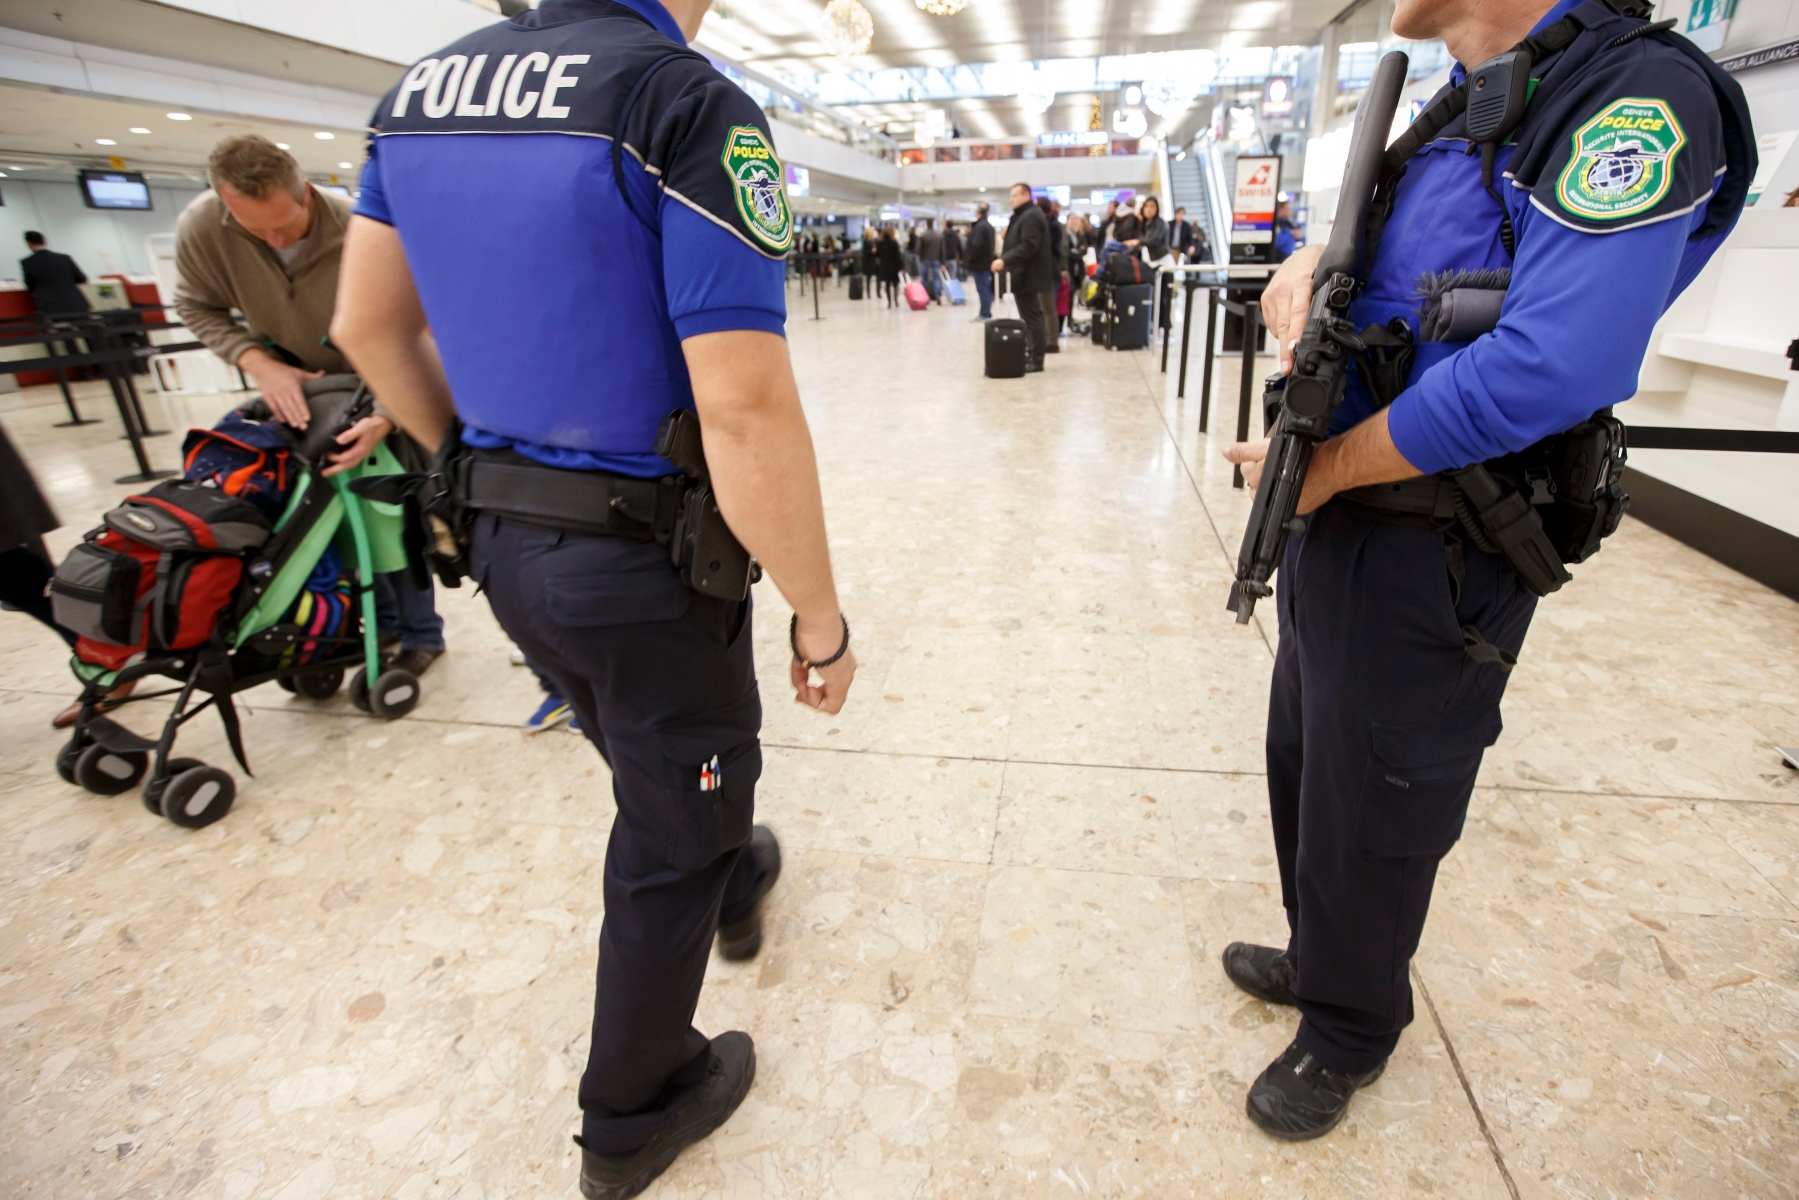 Swiss police officers patrol at the Geneva airport, during a high level of alert, in Geneva, Switzerland, Thursday, December 10, 2015. Police in Switzerland are hunting for four terror suspects, according to reports. Police believe the men are linked to the Paris attacks of November. According to local media a first suspect has been arrested. (KEYSTONE/Salvatore Di Nolfi) SWITZERLAND LEVEL VIGILANCE ATTACK